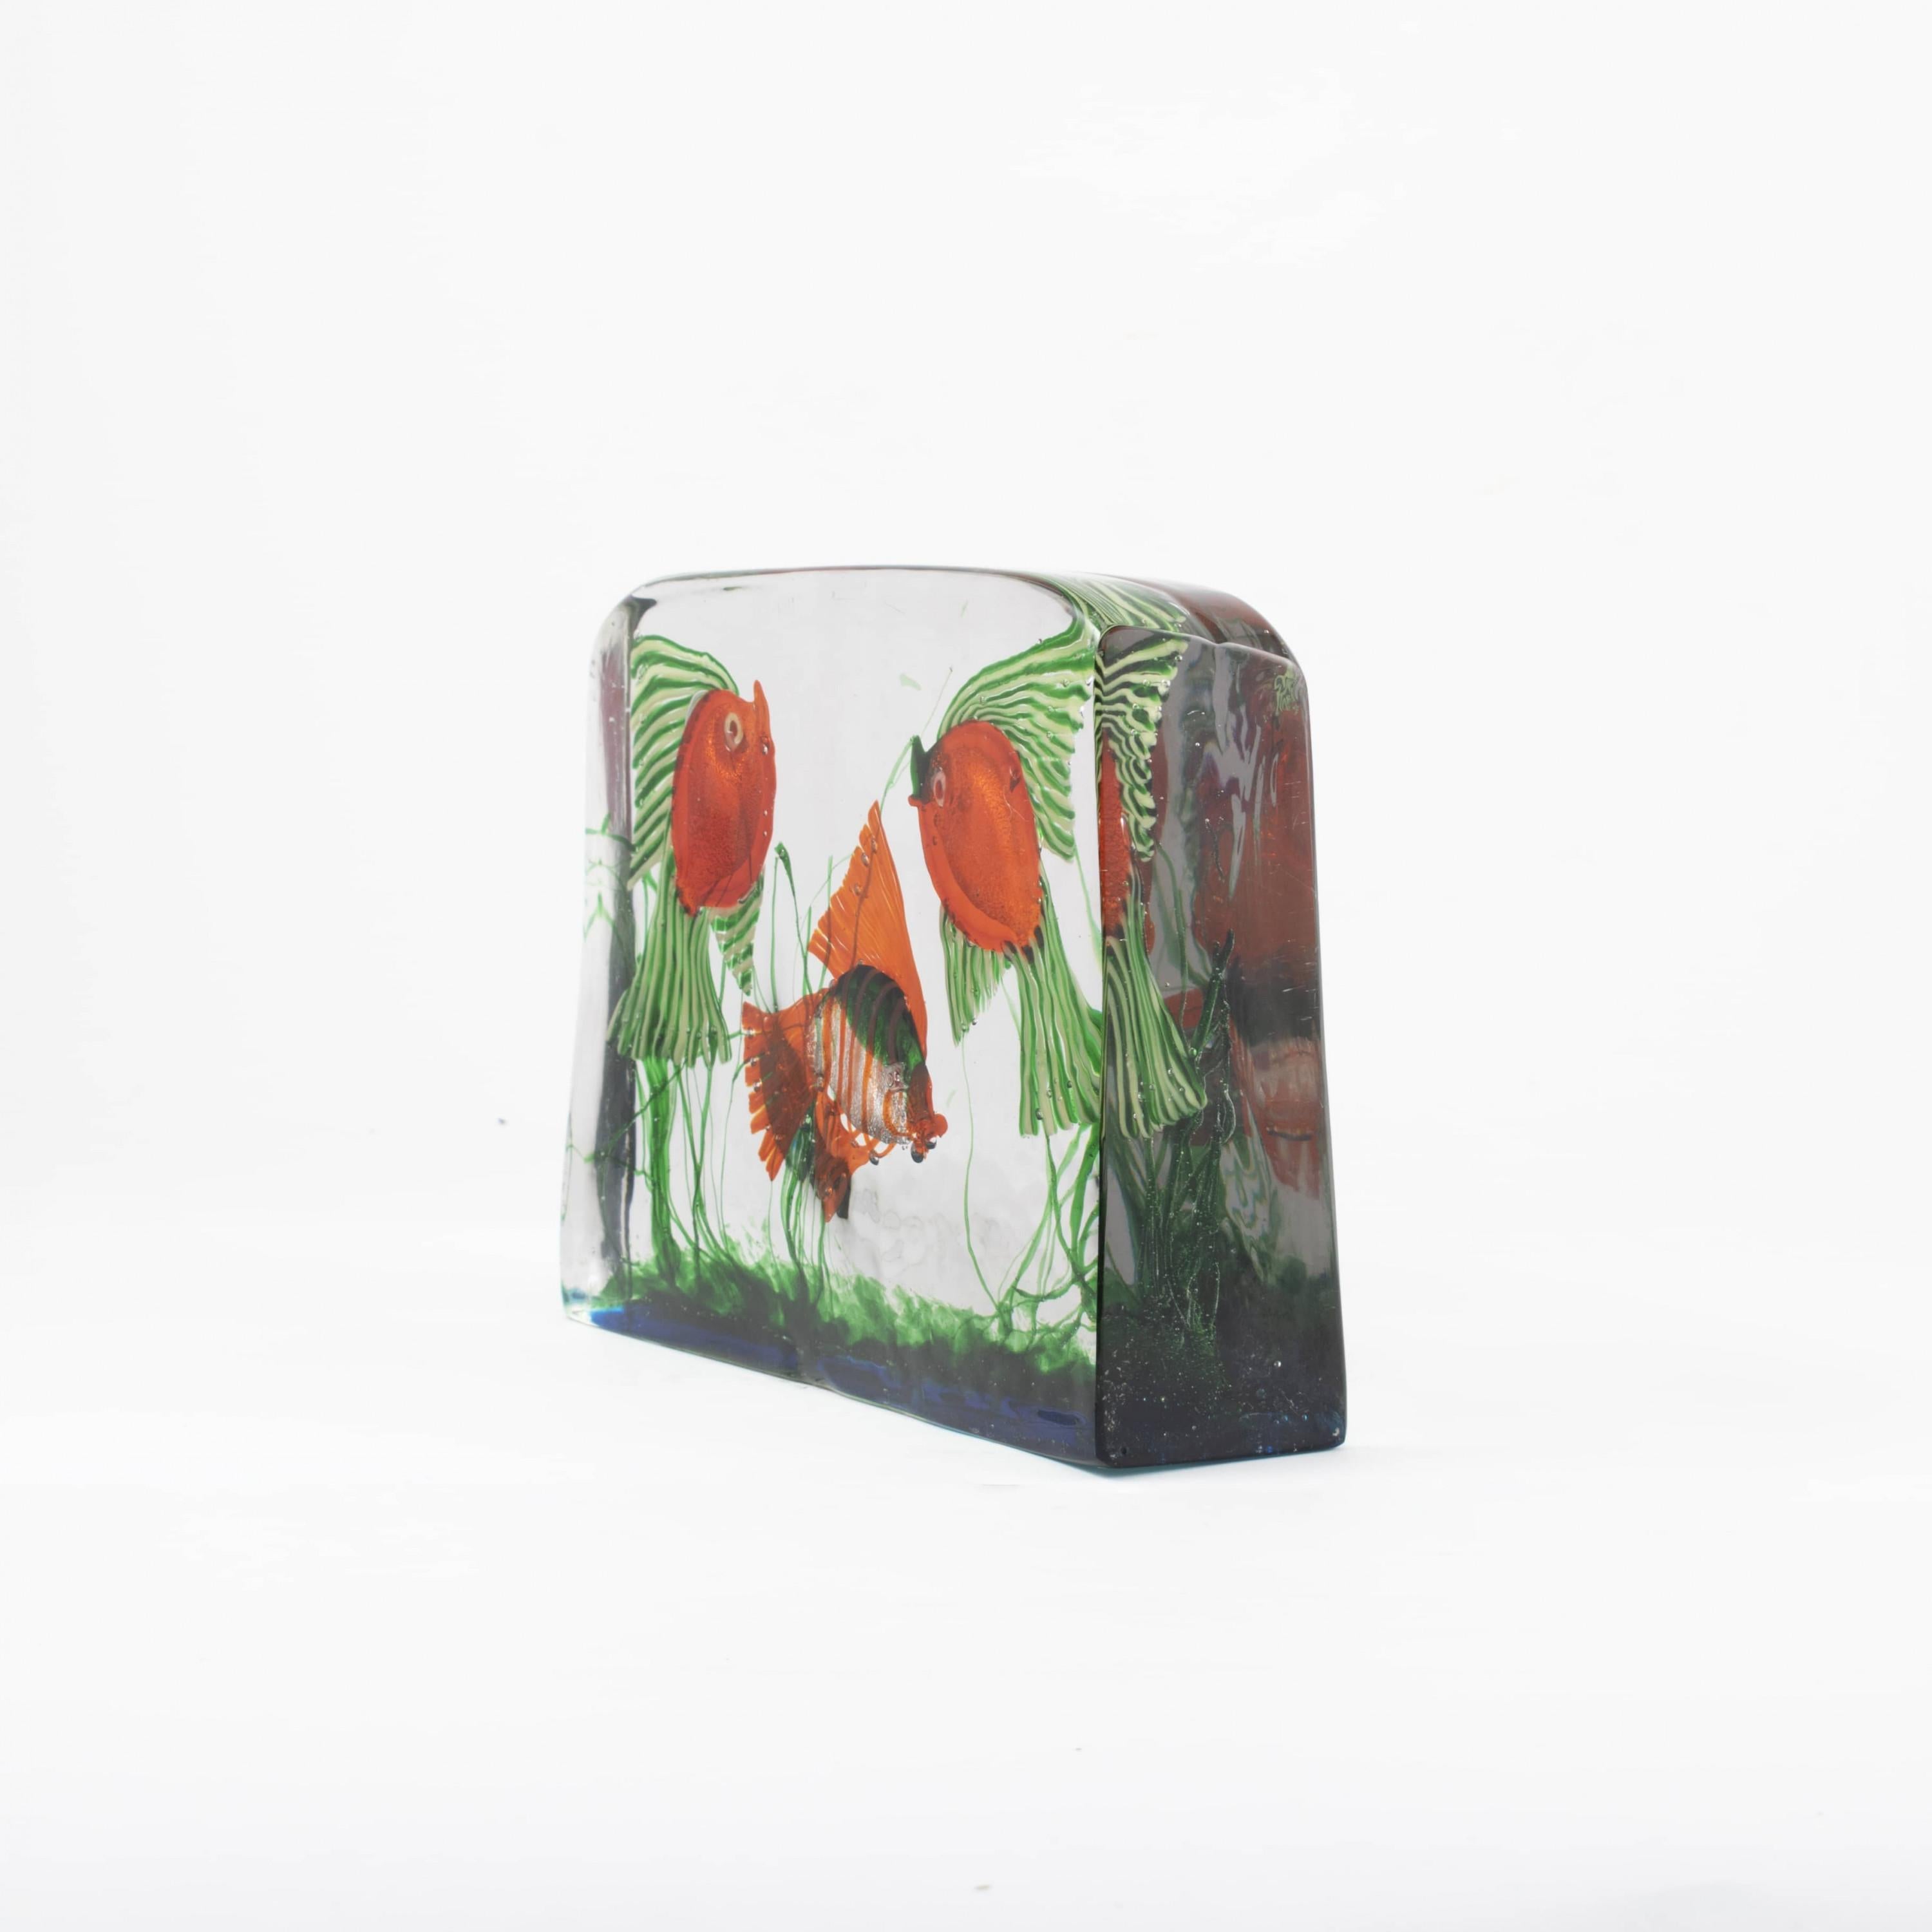 Archimede Seguso.
Italian Murano glass fish aquarium. Featuring multicolored inclusions with three fish and seagrass.
Italy, Venice 1950-1959.

The Seguso family has been dedicated to the art of Murano glass in Venice since 1397. Seguso is one